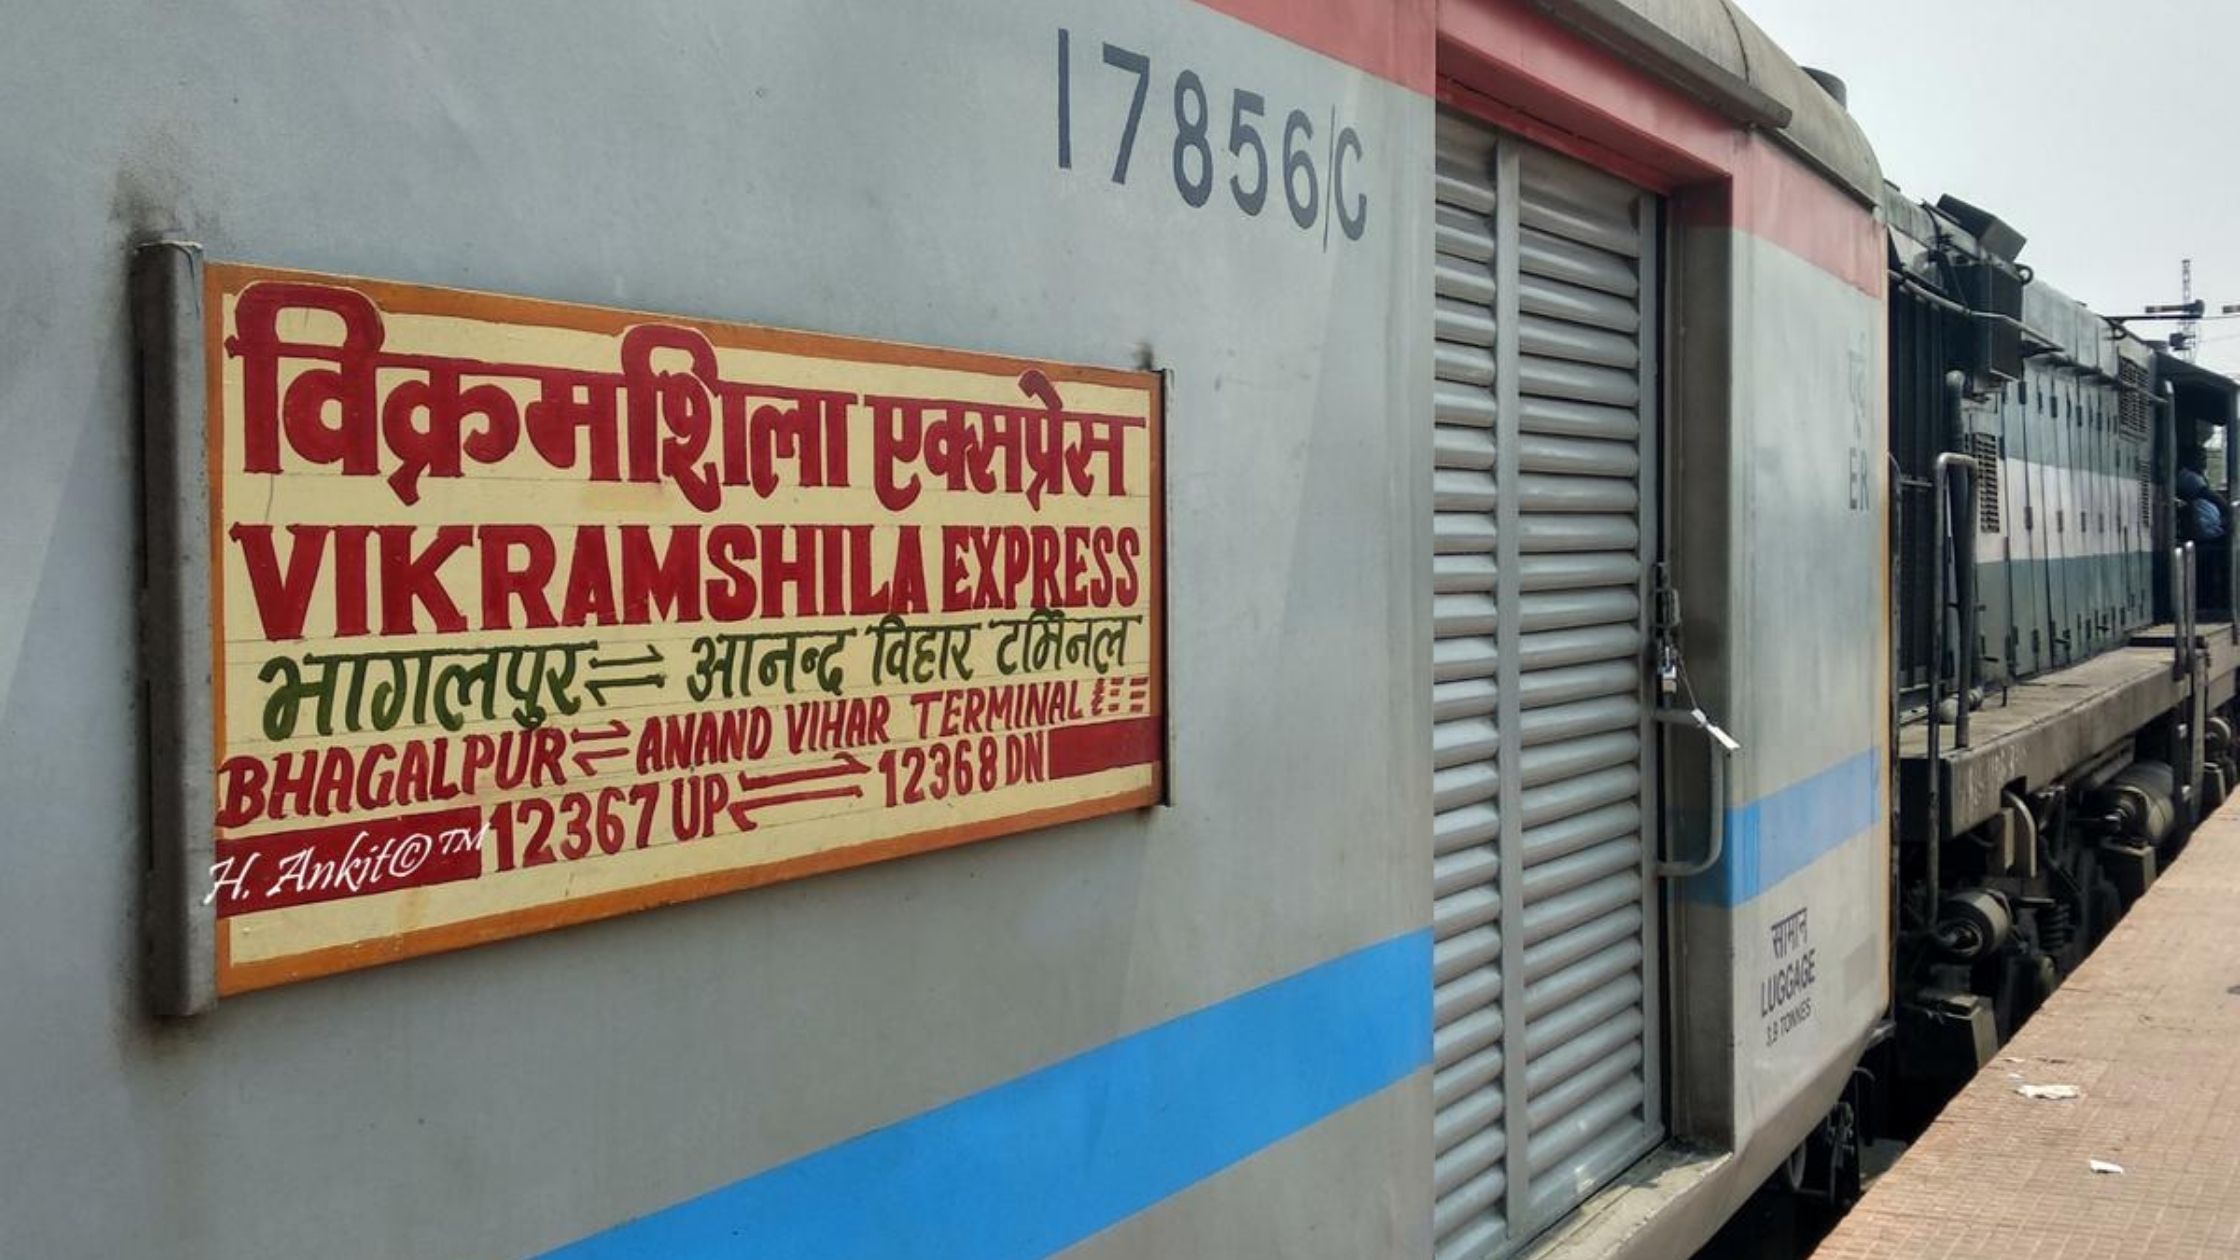 Route of many trains changed in Bihar including Vikramshila Express